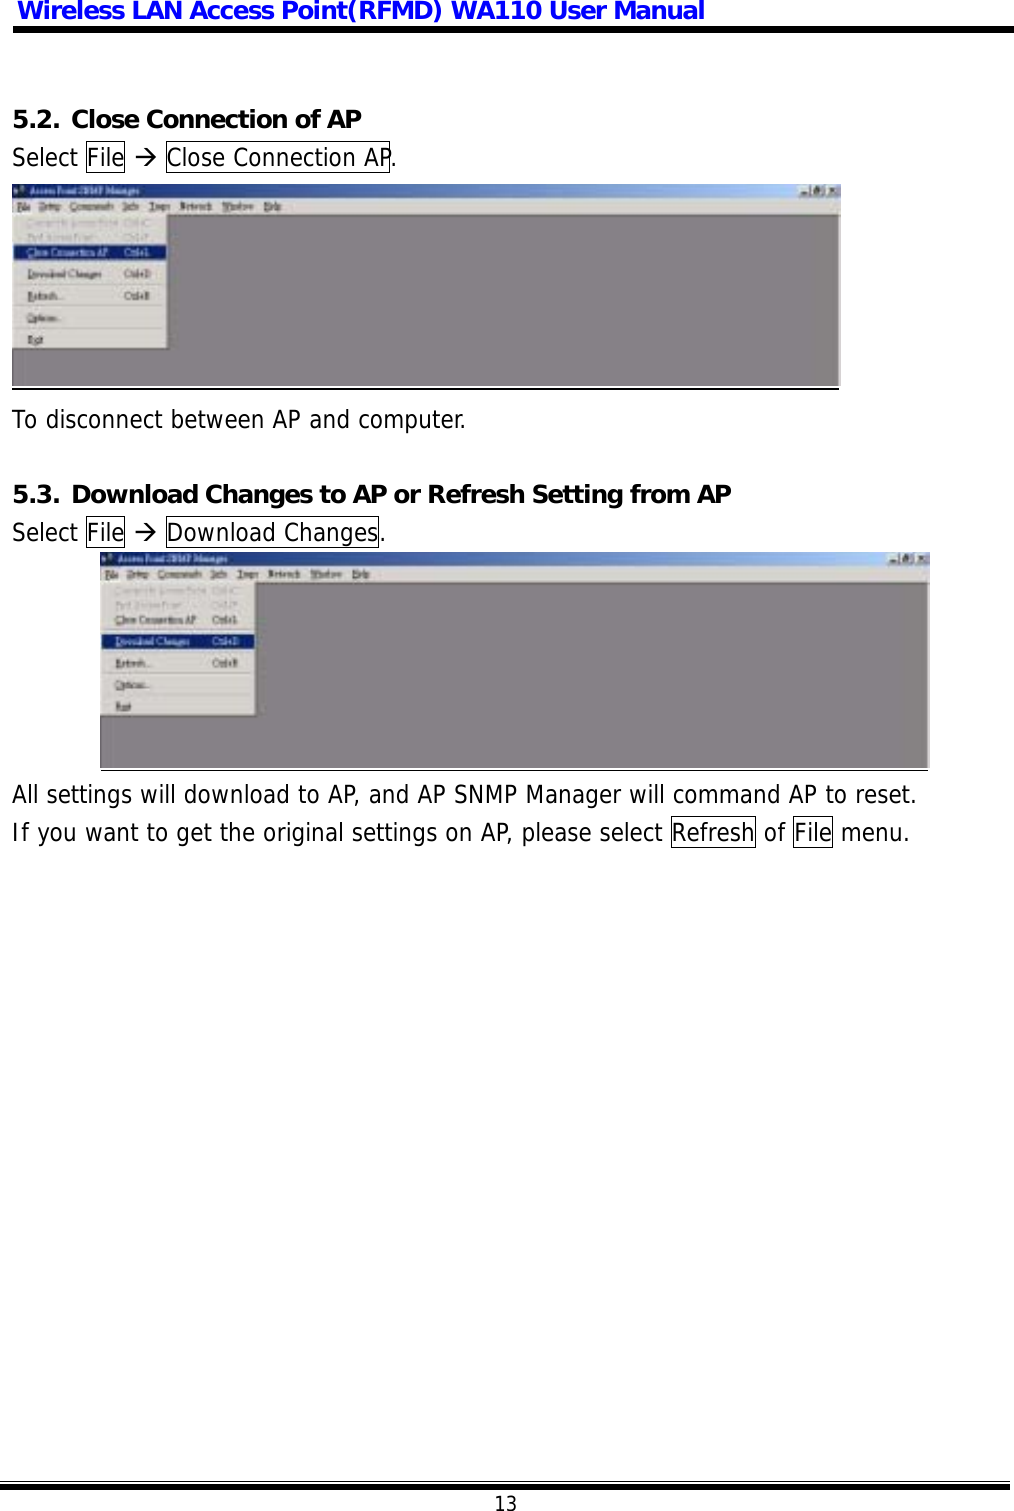 Wireless LAN Access Point(RFMD) WA110 User Manual  13   5.2. Close Connection of AP Select File  Close Connection AP.  To disconnect between AP and computer.  5.3. Download Changes to AP or Refresh Setting from AP Select File  Download Changes.  All settings will download to AP, and AP SNMP Manager will command AP to reset. If you want to get the original settings on AP, please select Refresh of File menu.                 